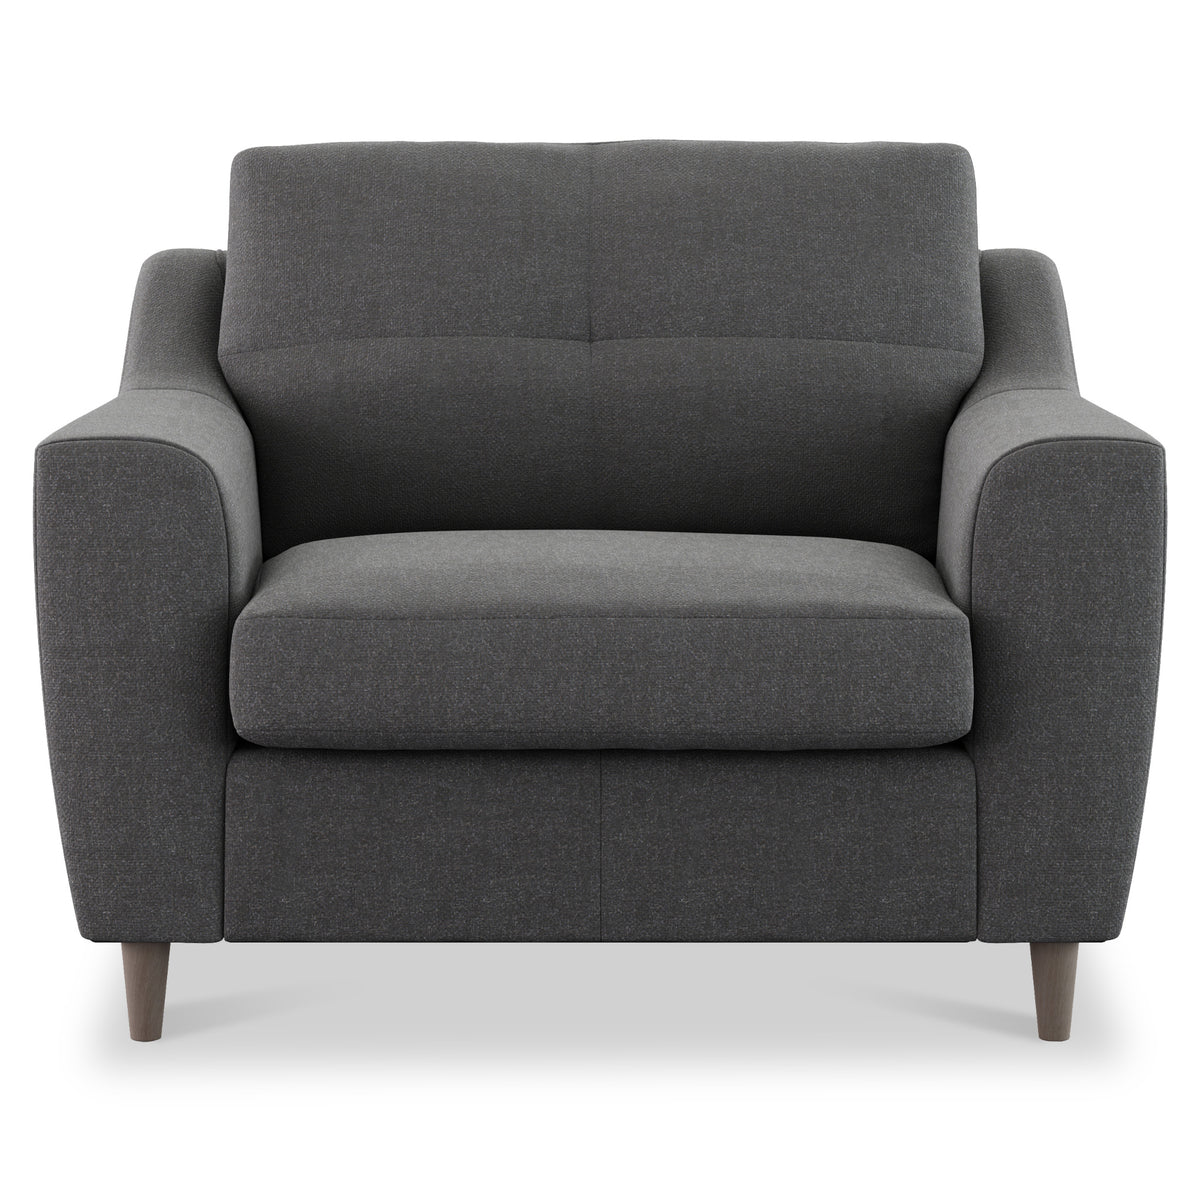 Justin Charcoal Snuggle Living Room Chair from Roseland Furniture